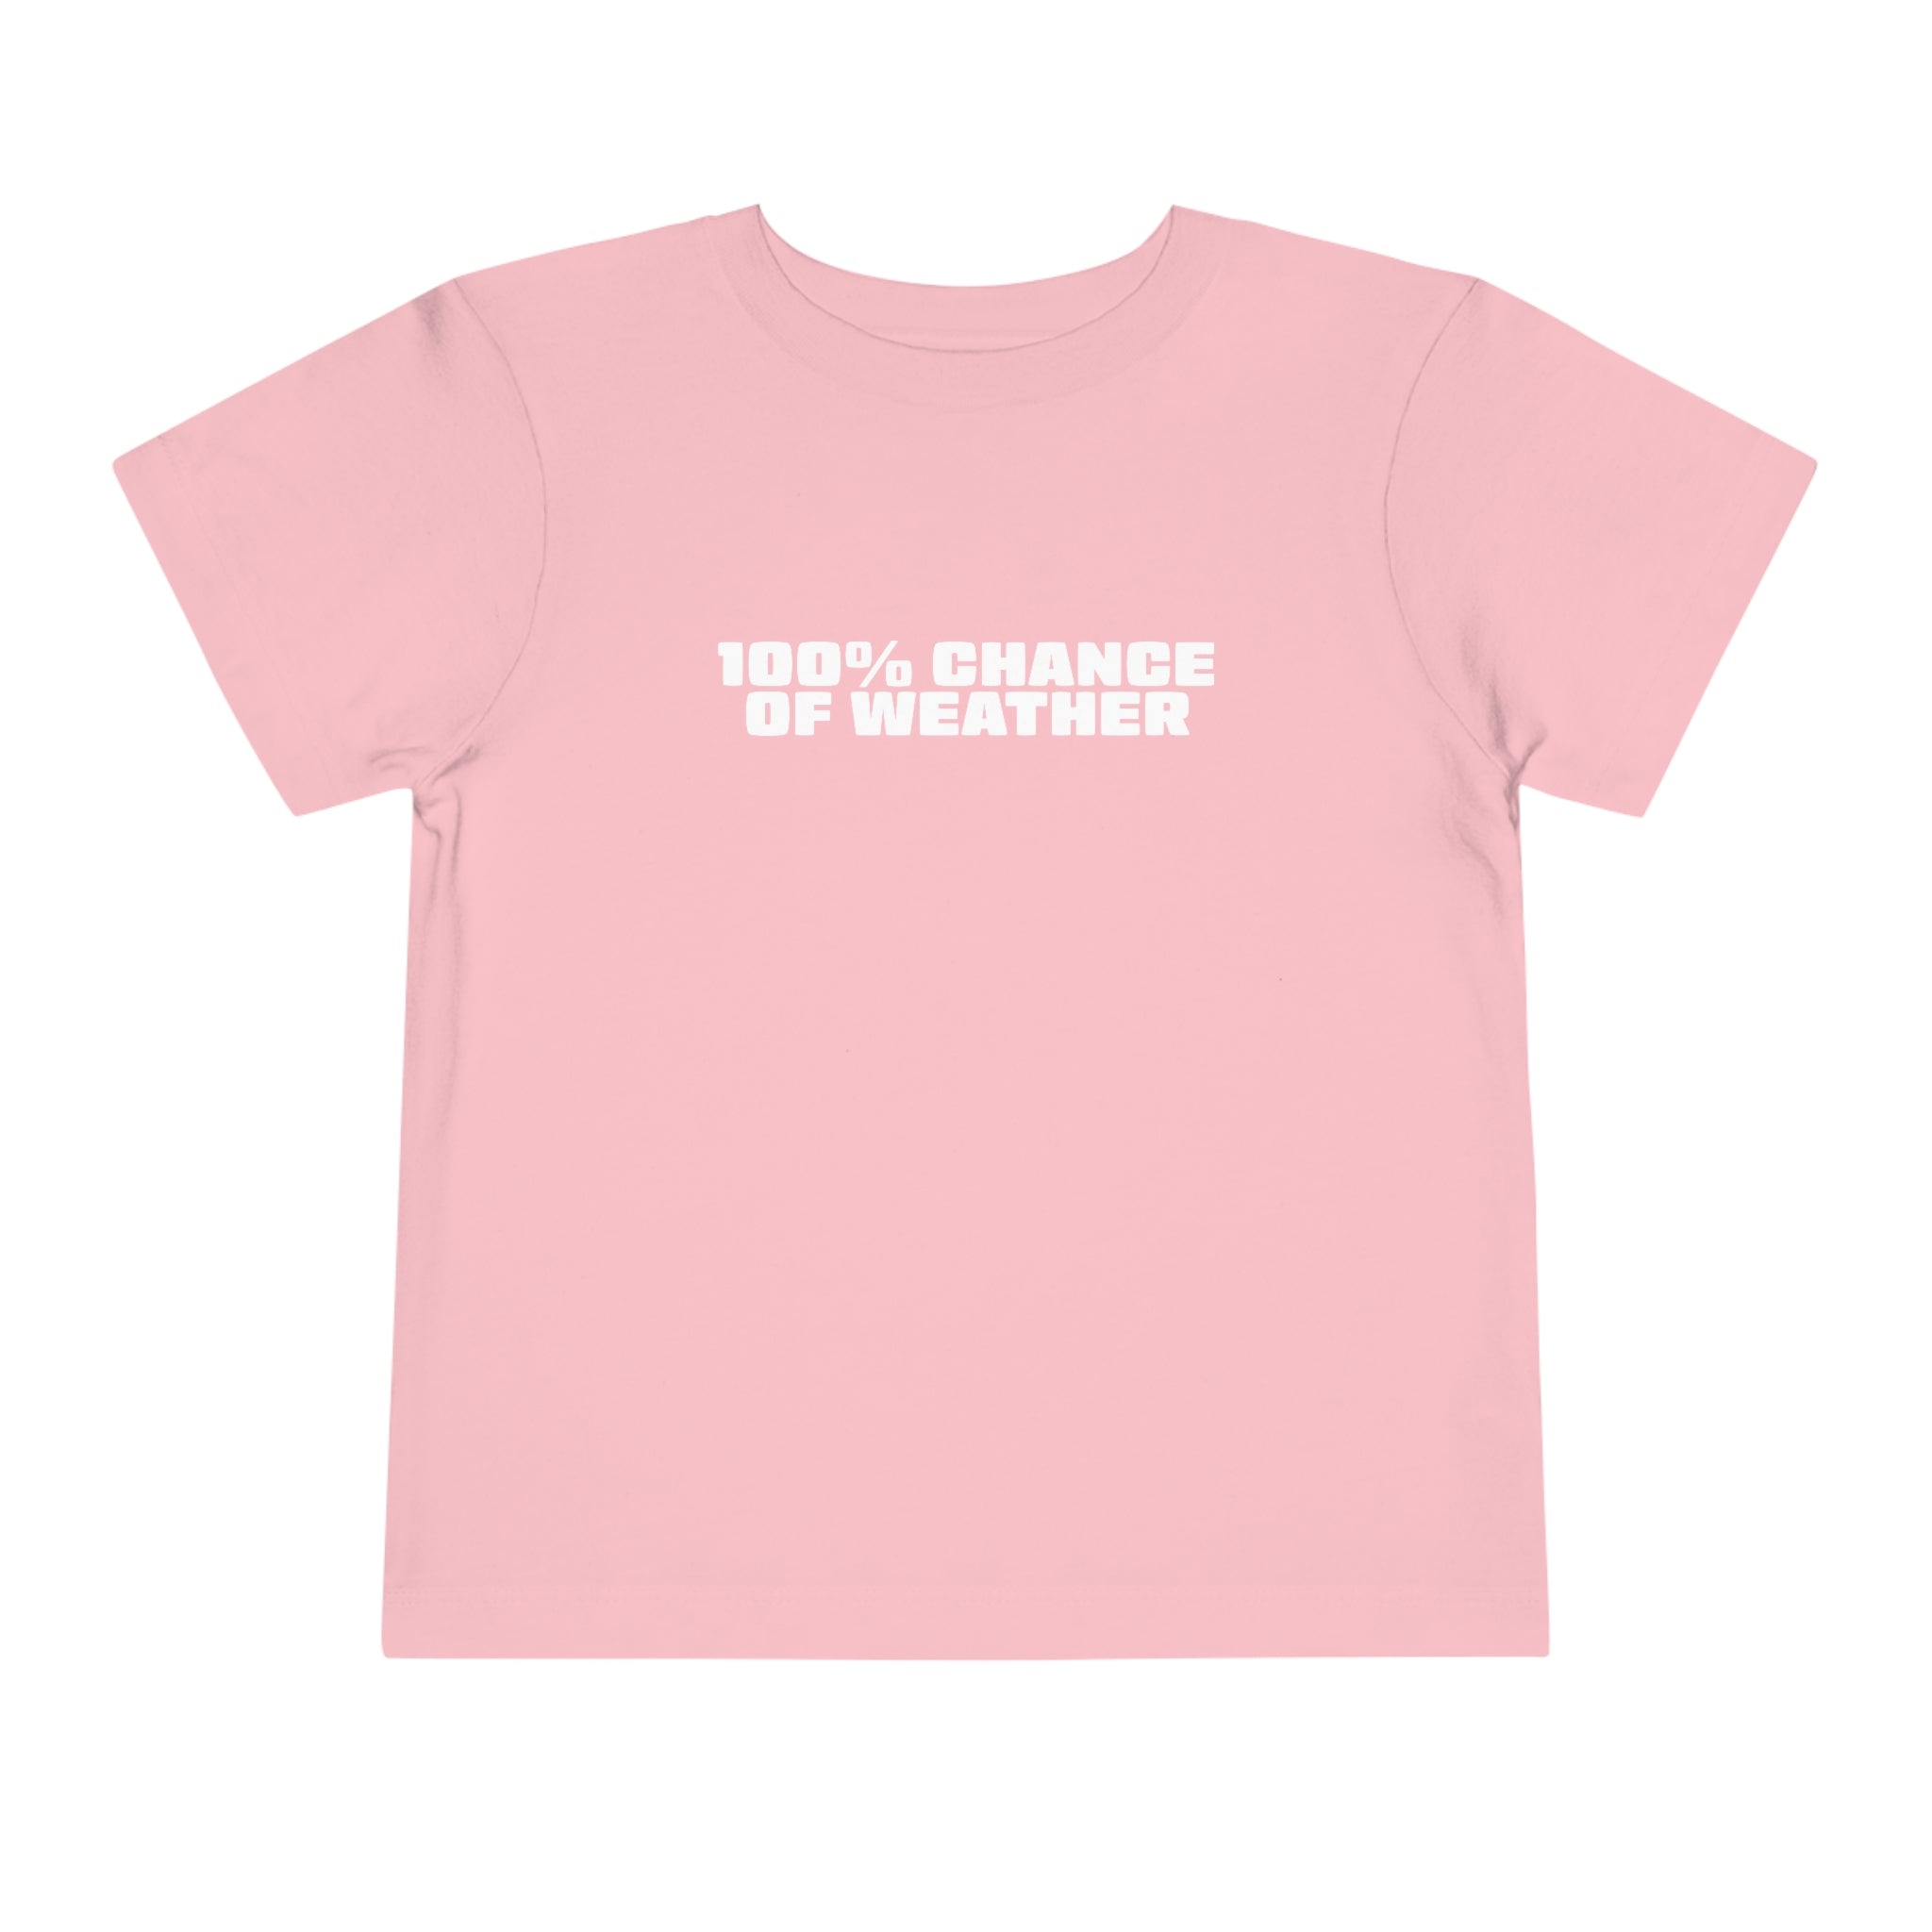 100% Chance of Weather Toddler Tee 